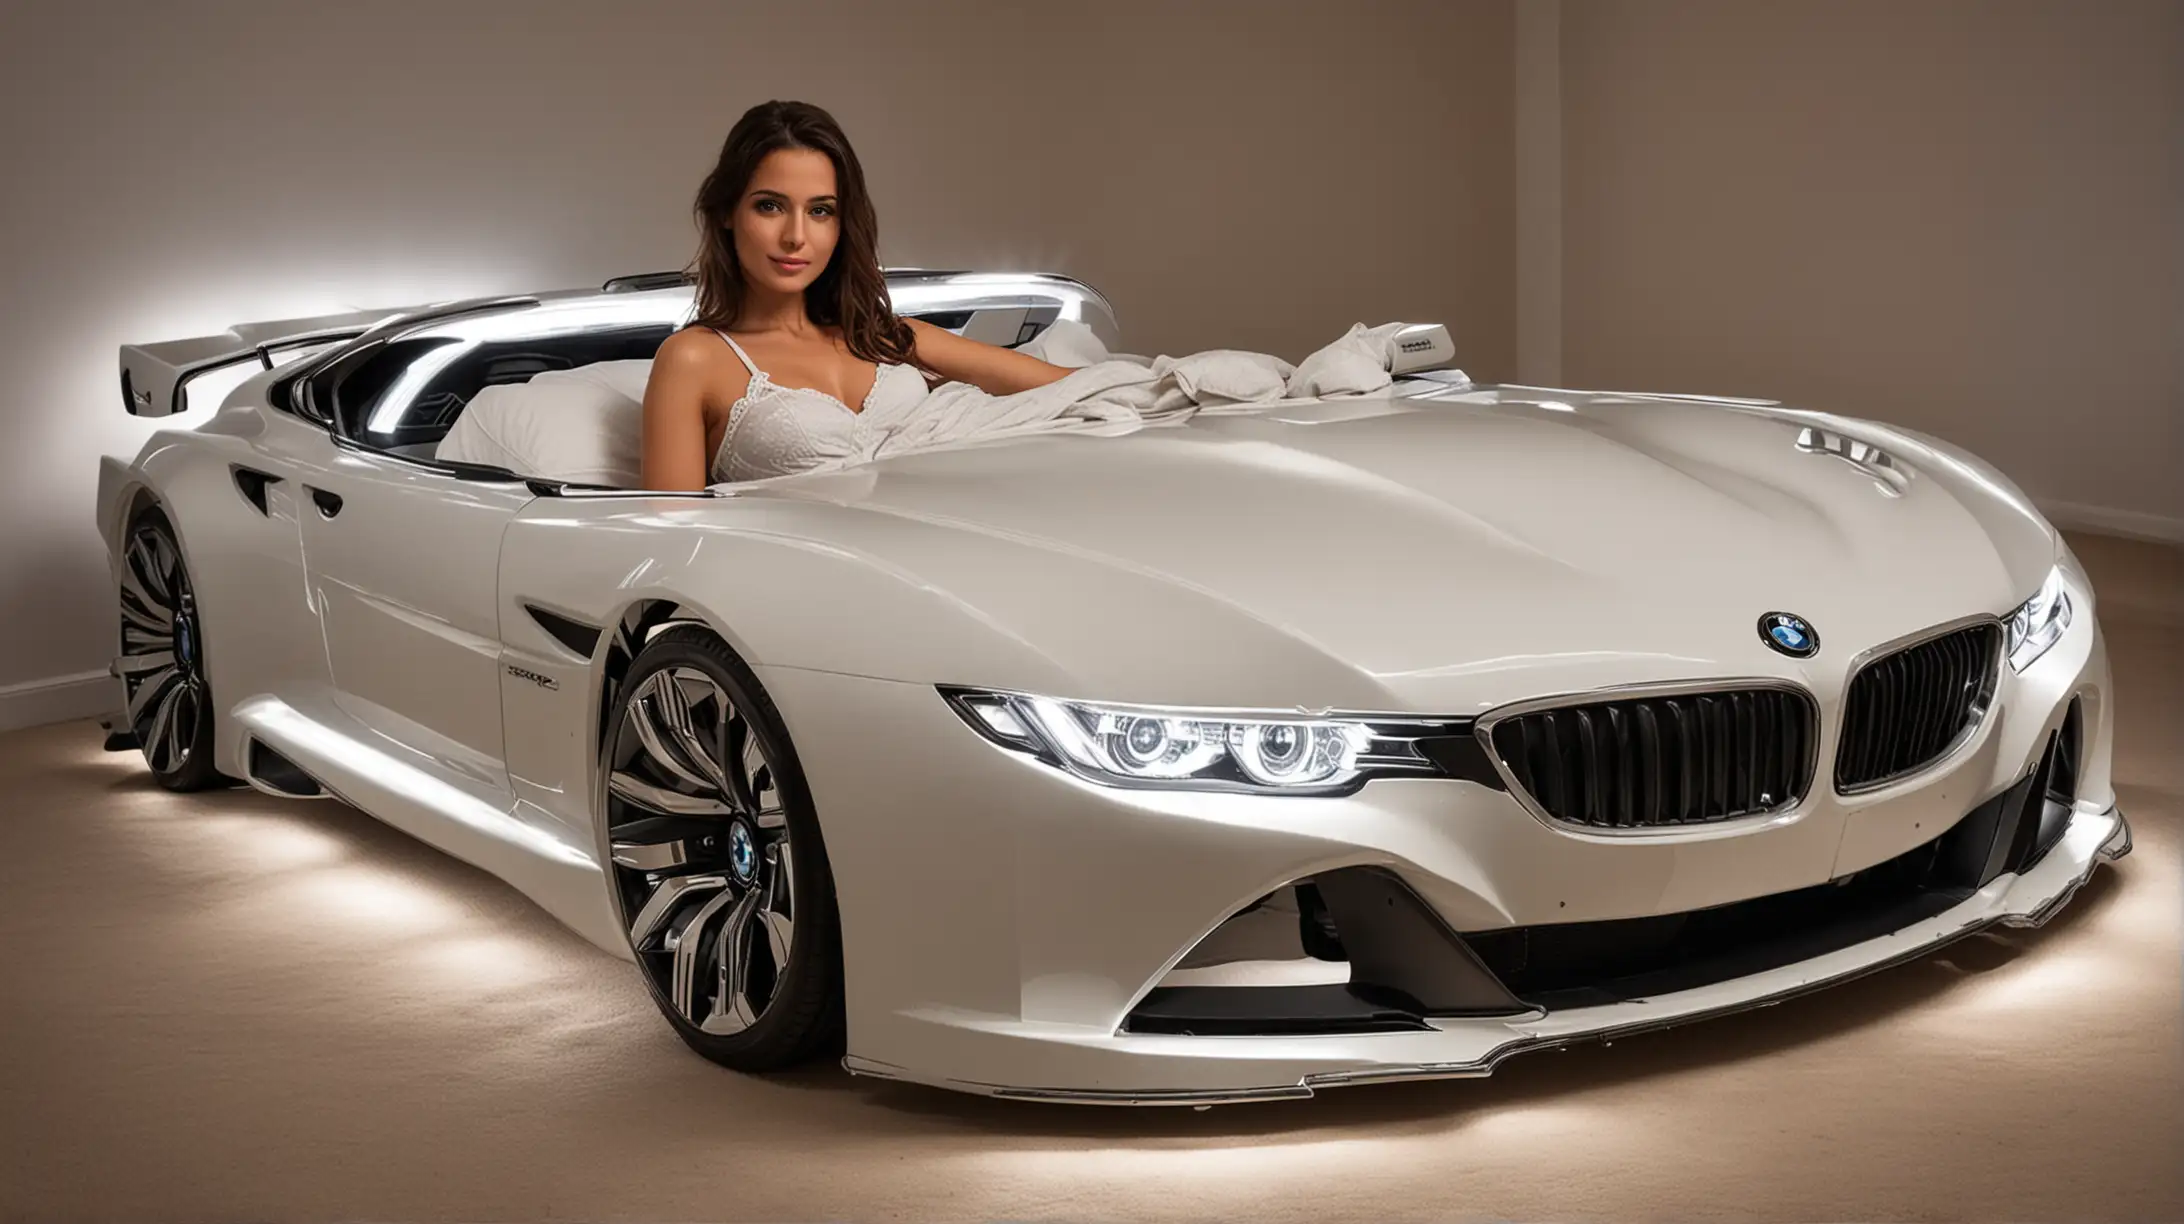 Luxurious BMW CarShaped Double Bed with Illuminated Headlights Featuring a Beautiful Woman